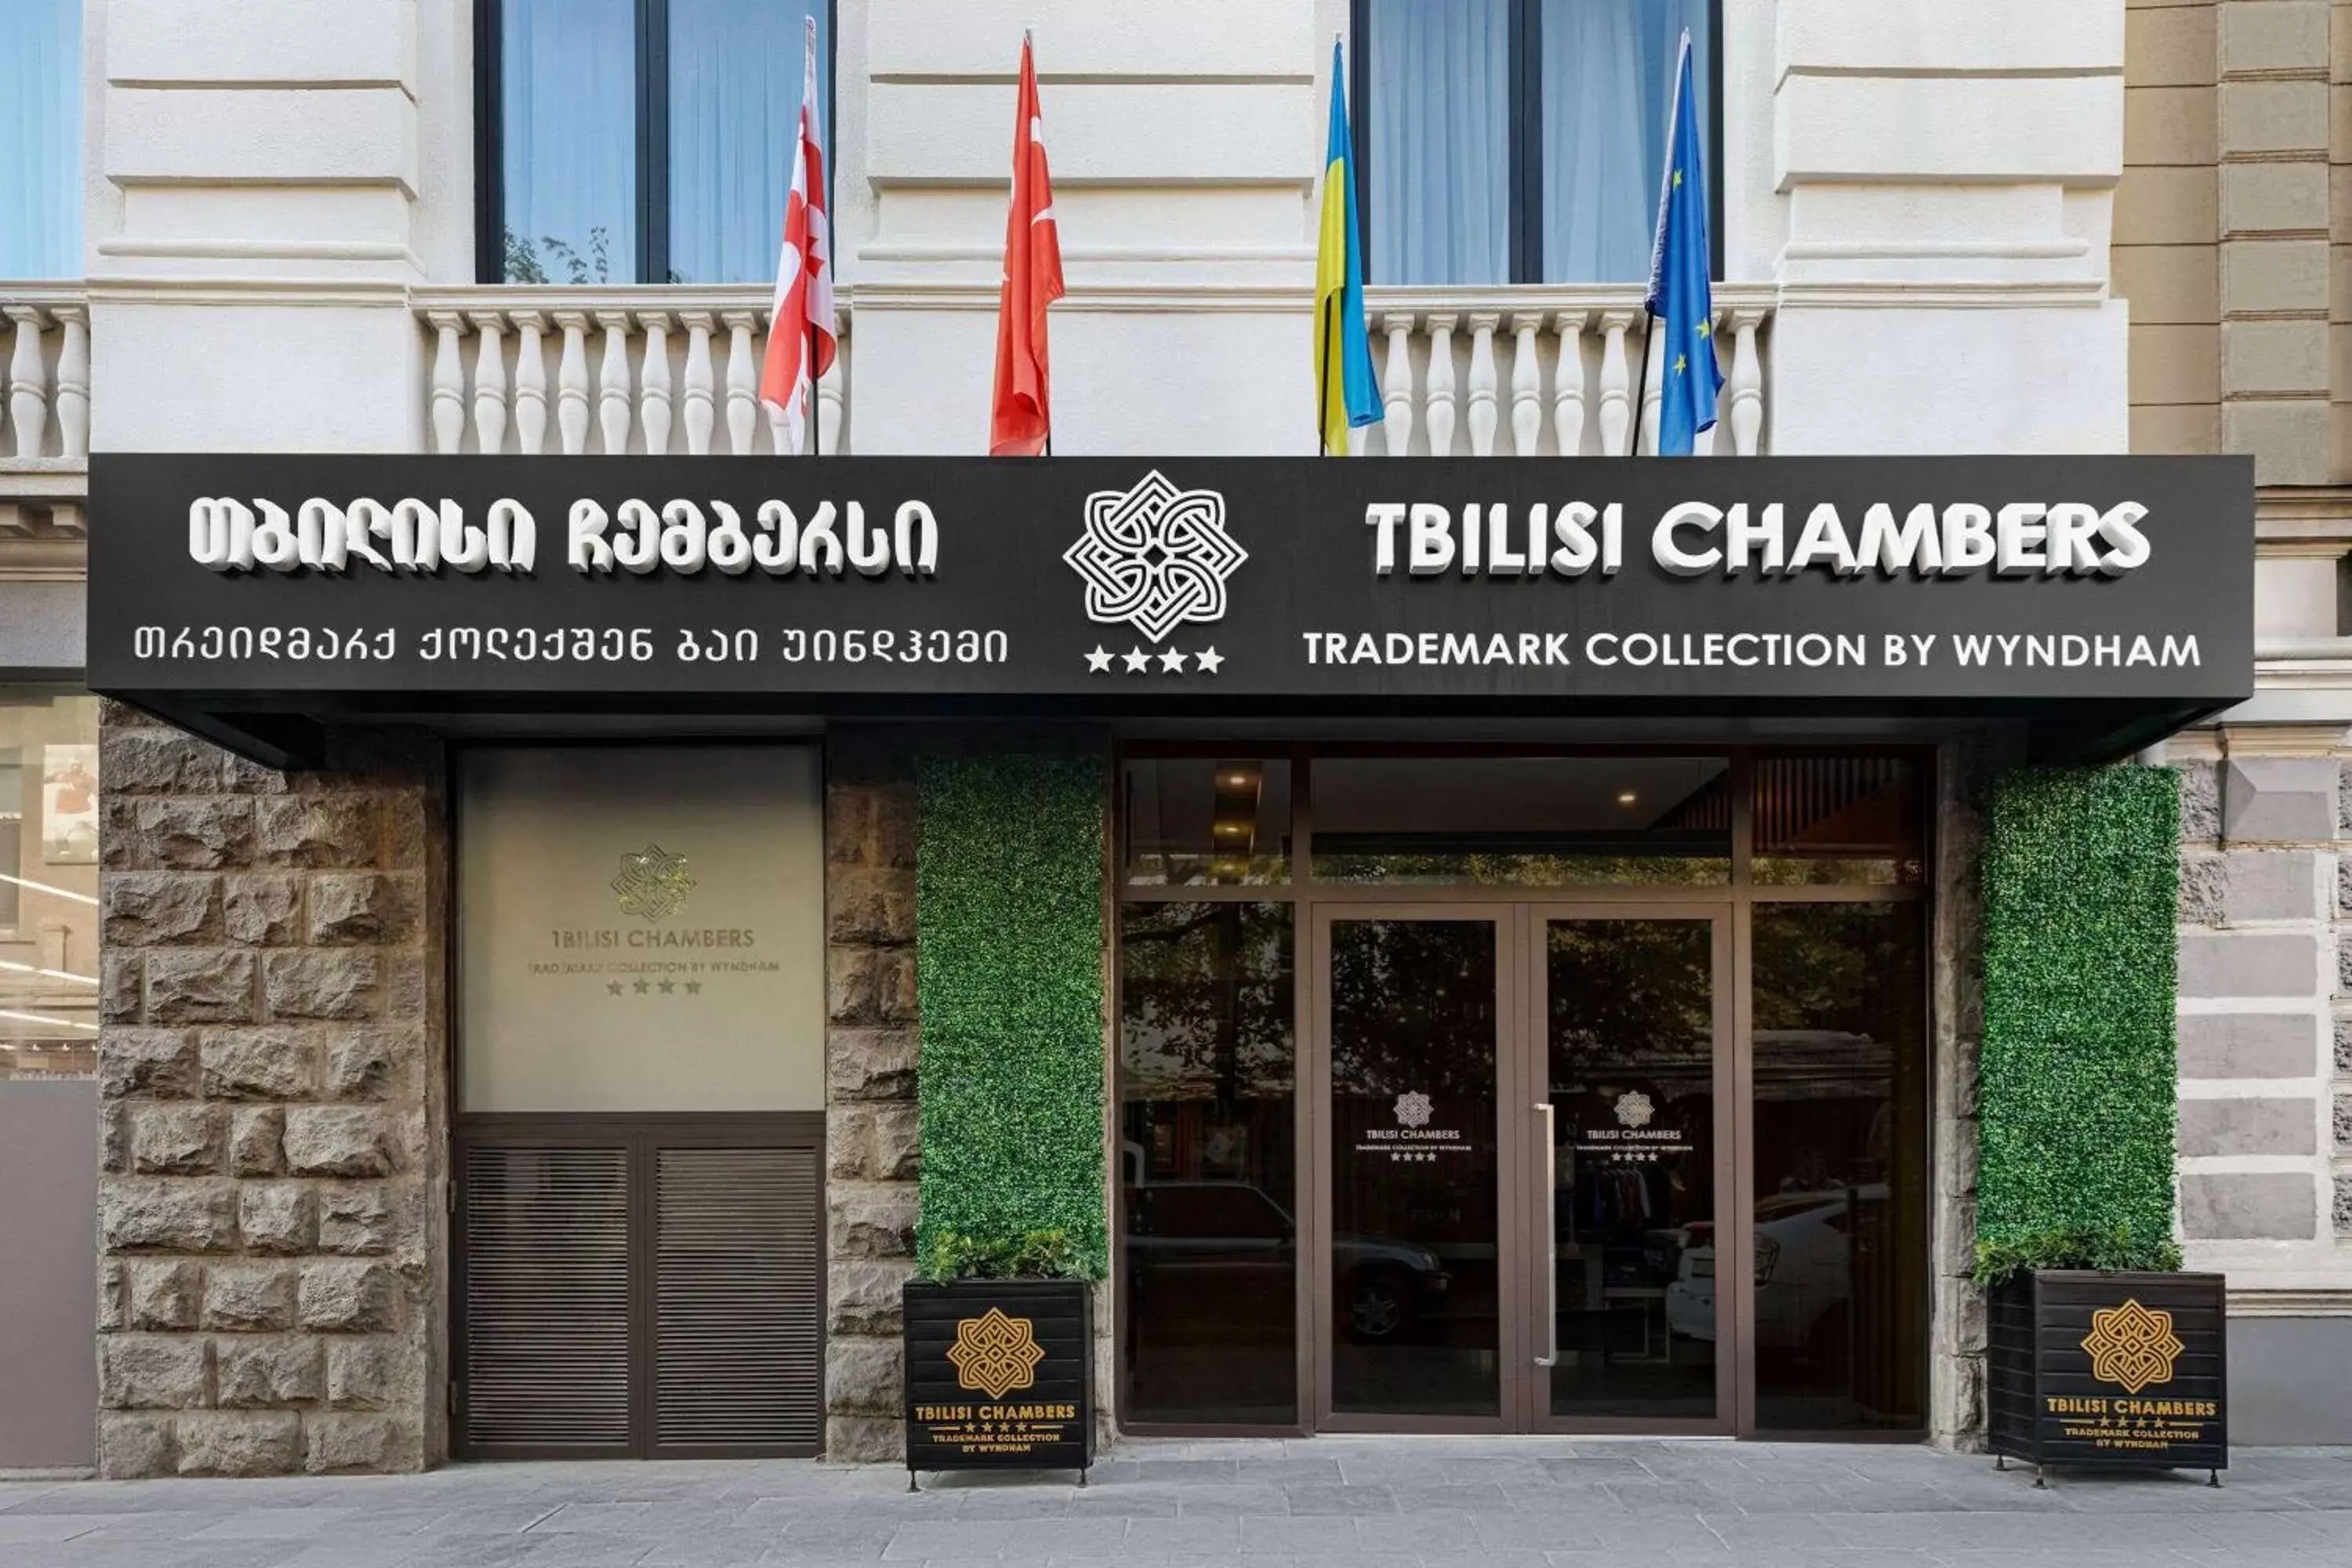 Property building in Tbilisi Chambers, Trademark Collection by Wyndham